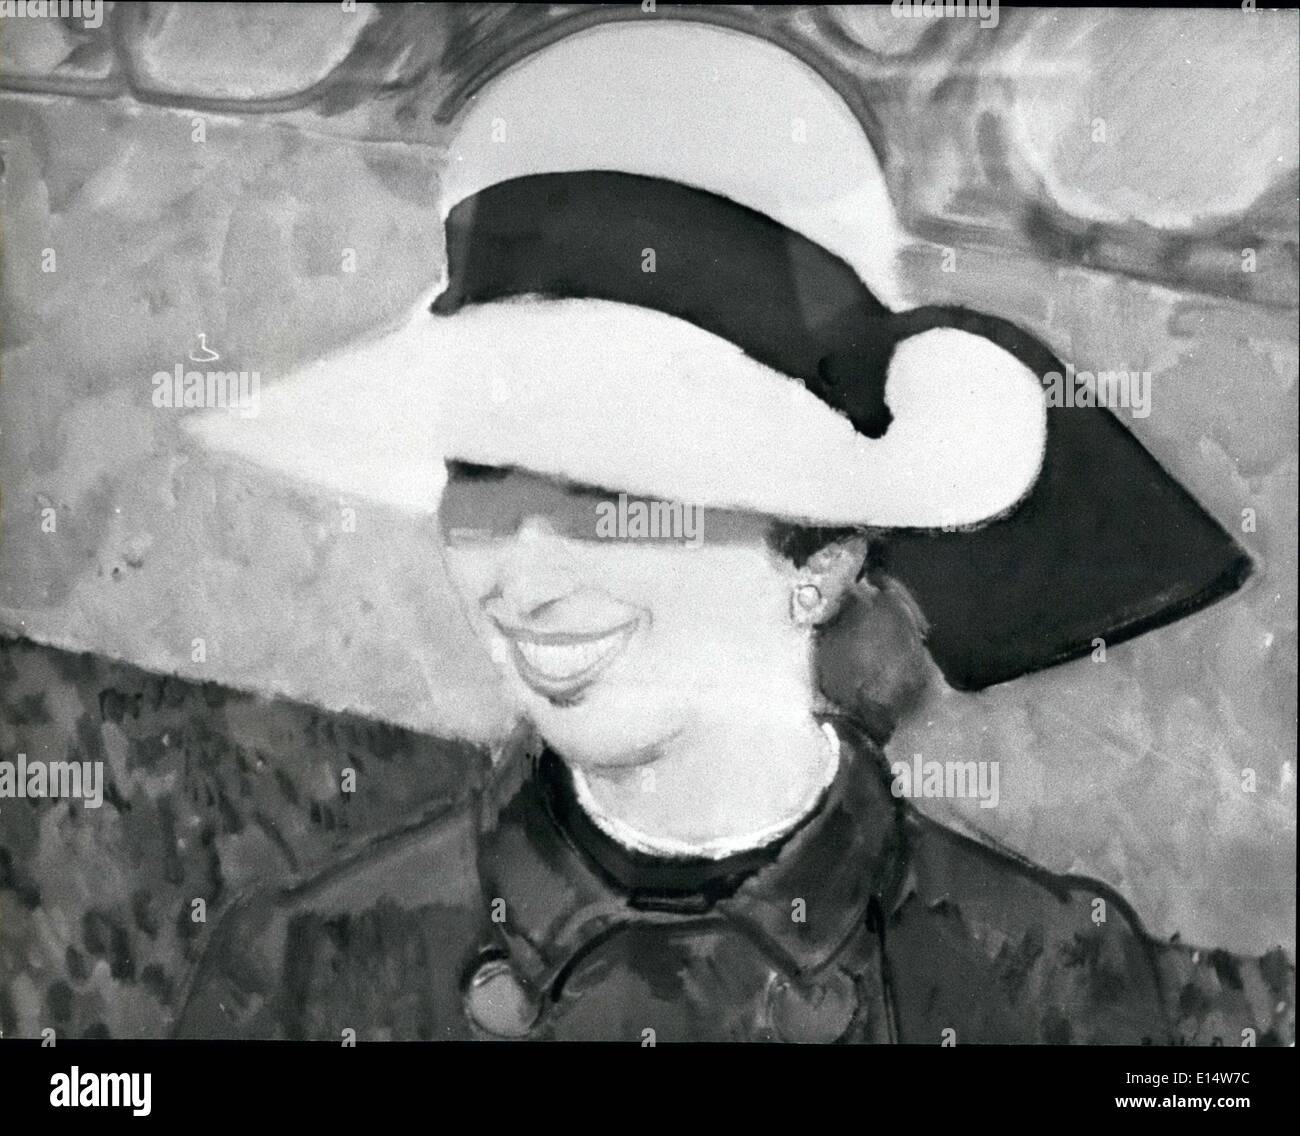 Apr. 18, 2012 - Royal Academy Summer Exhibition: Today (Friday) is Private View day of the Royal Academy of Arts Exhibition. Photo shows A painting entitled ''The White Hat'' by Ruskin Spear, R.A., which looks remarkably like Princess Anne. Stock Photo